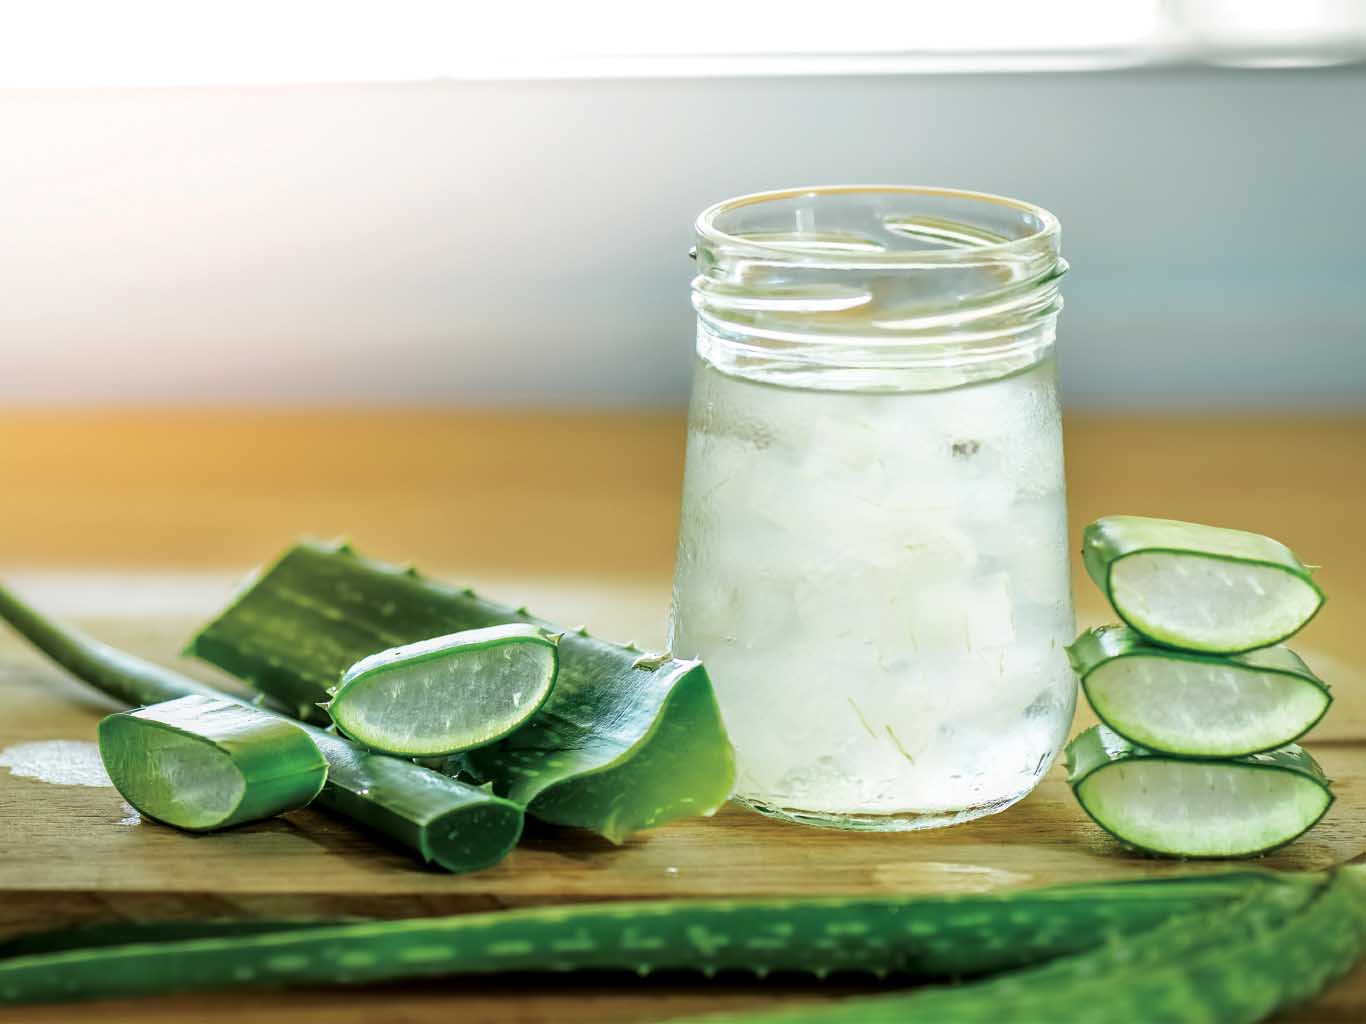 aloe vera leaves and fresh gel in a glass container